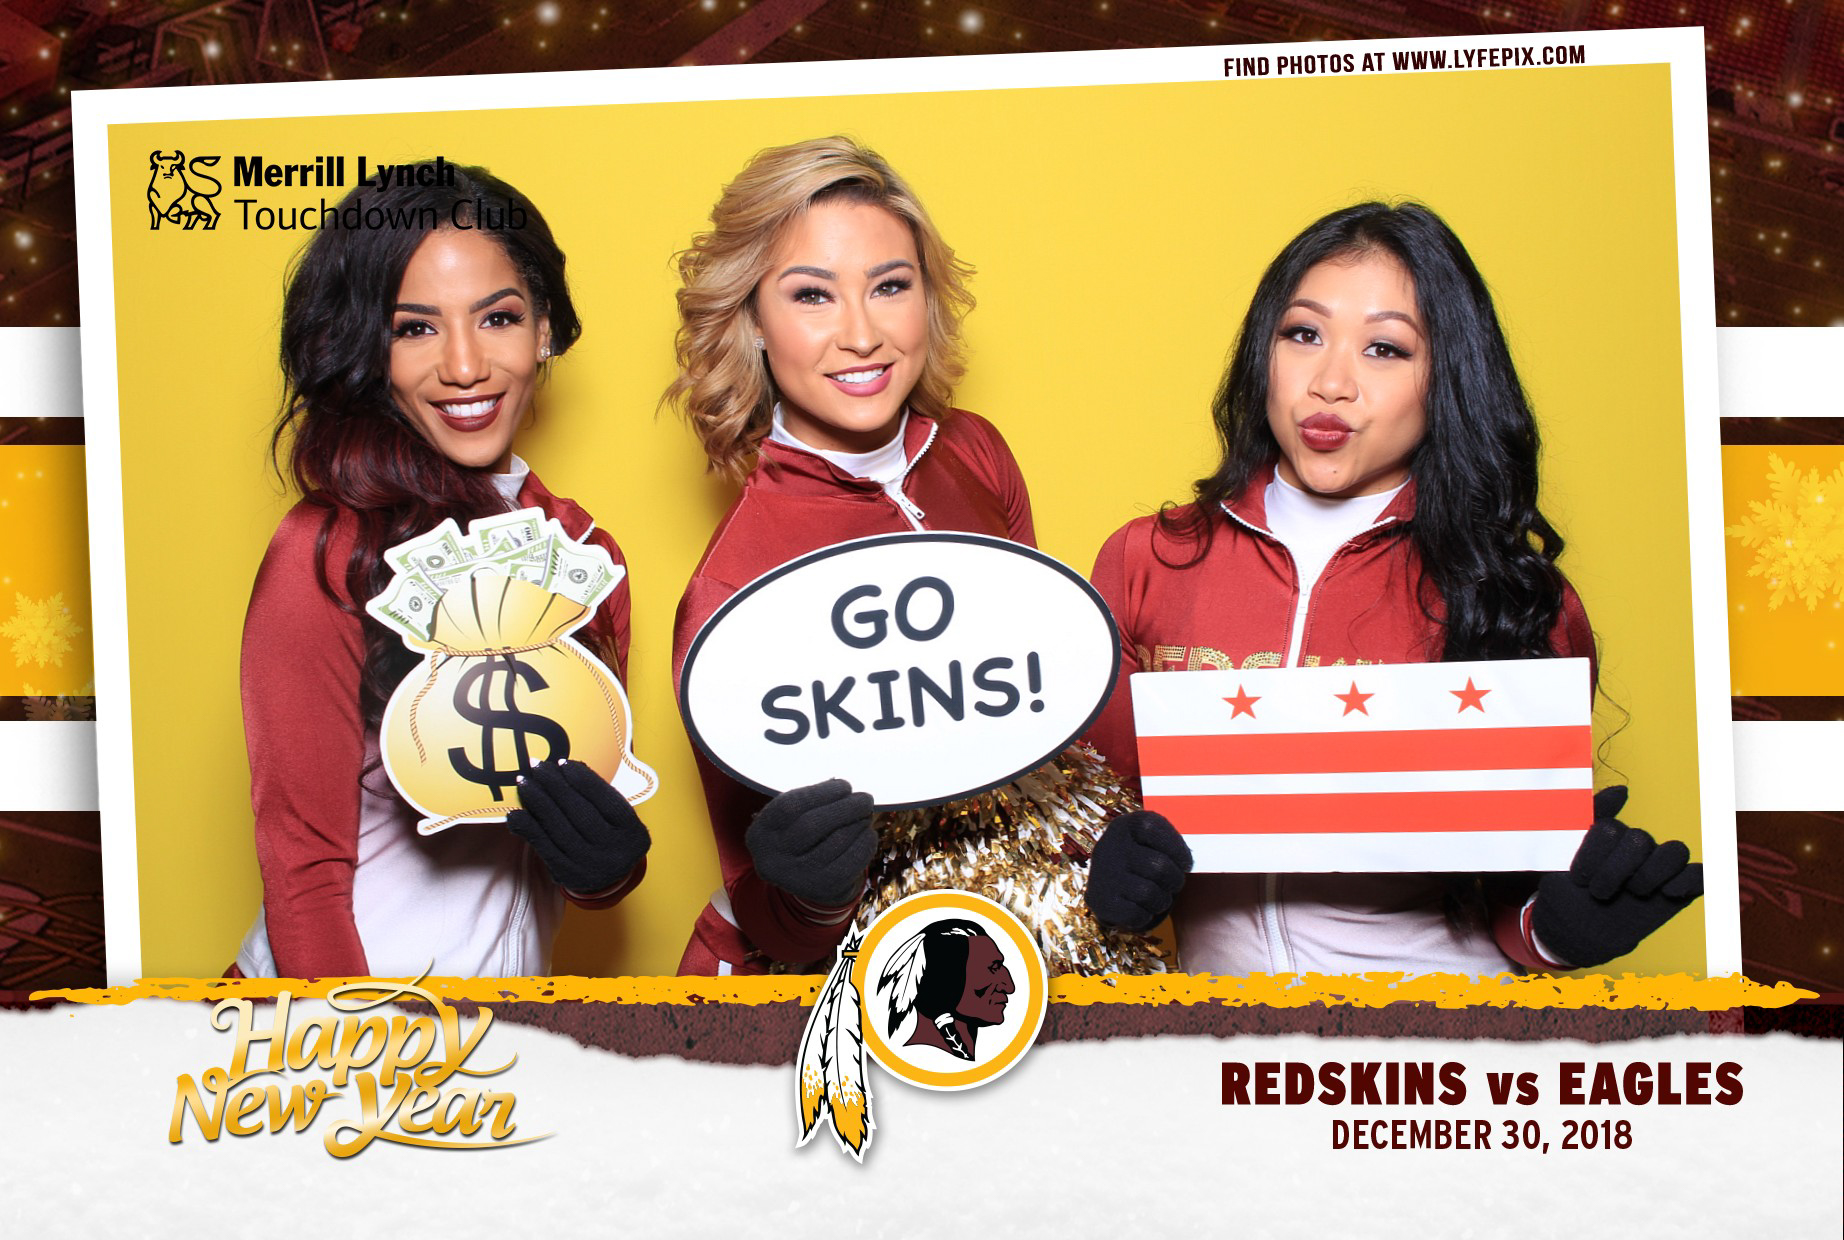 Photo booth photo from an activation for the Washington Redskins during a game with the Philadelphia Eagles touchdown at FedEx field in Landover, Maryland